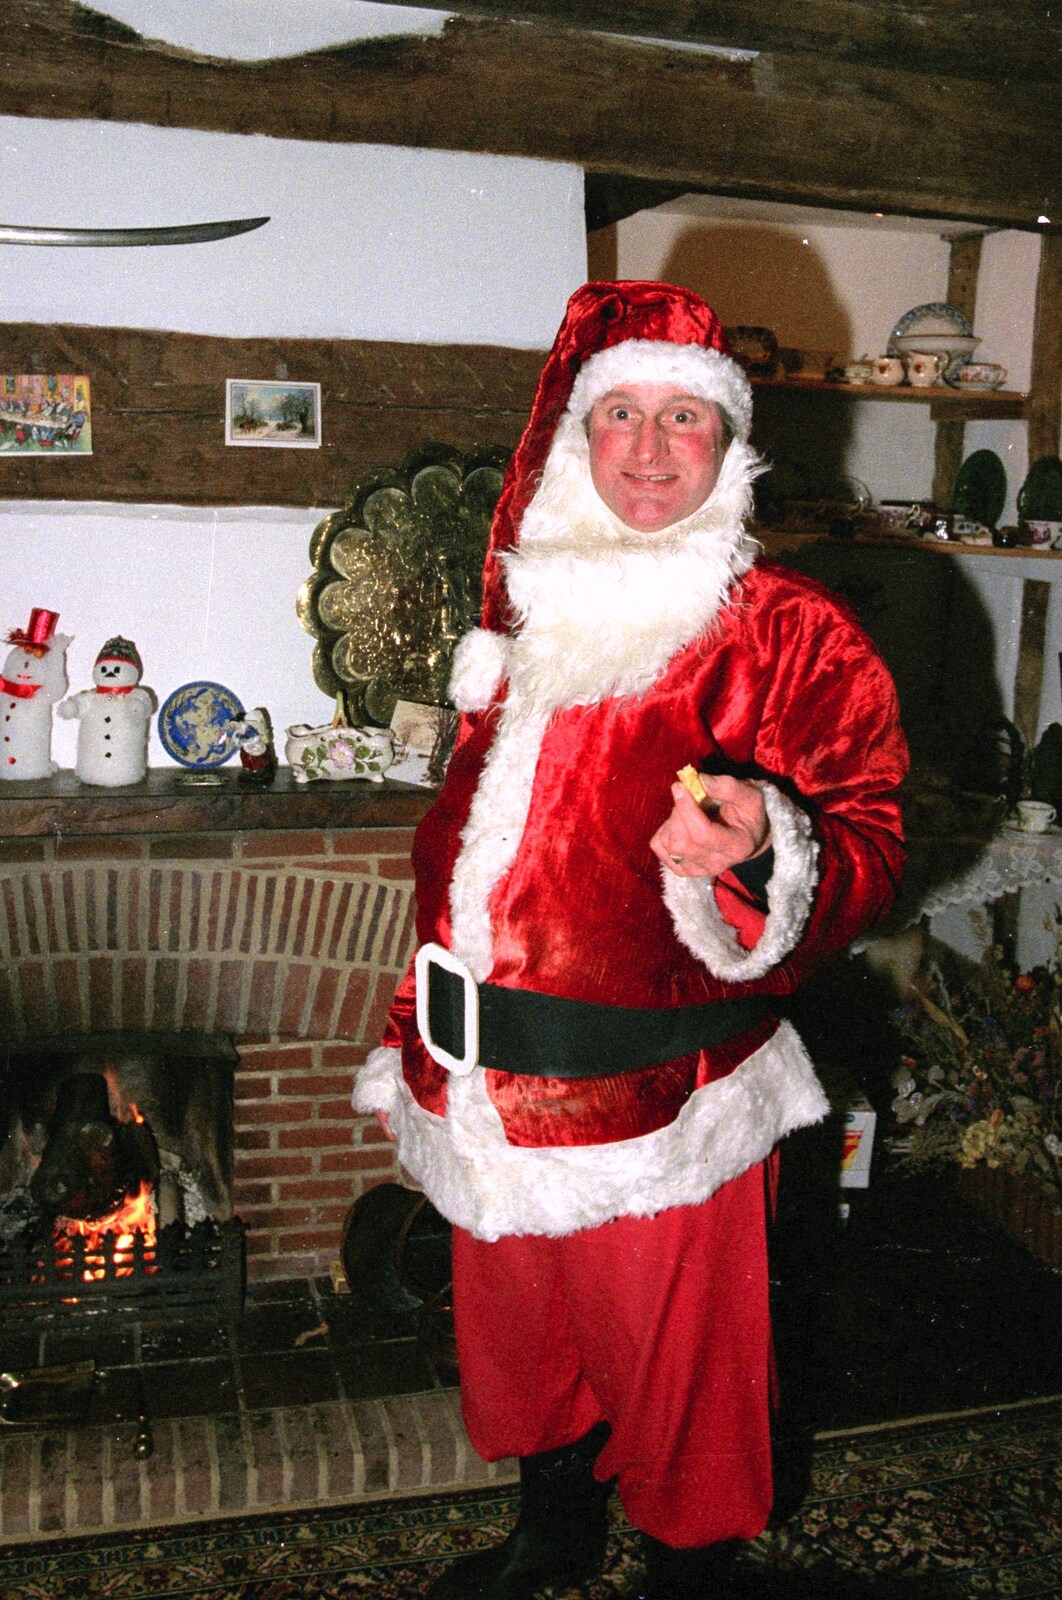 Geoff dresses up as santa from Late Night, and Christmas with the Coxes, Needham, Norfolk - 25th December 1989